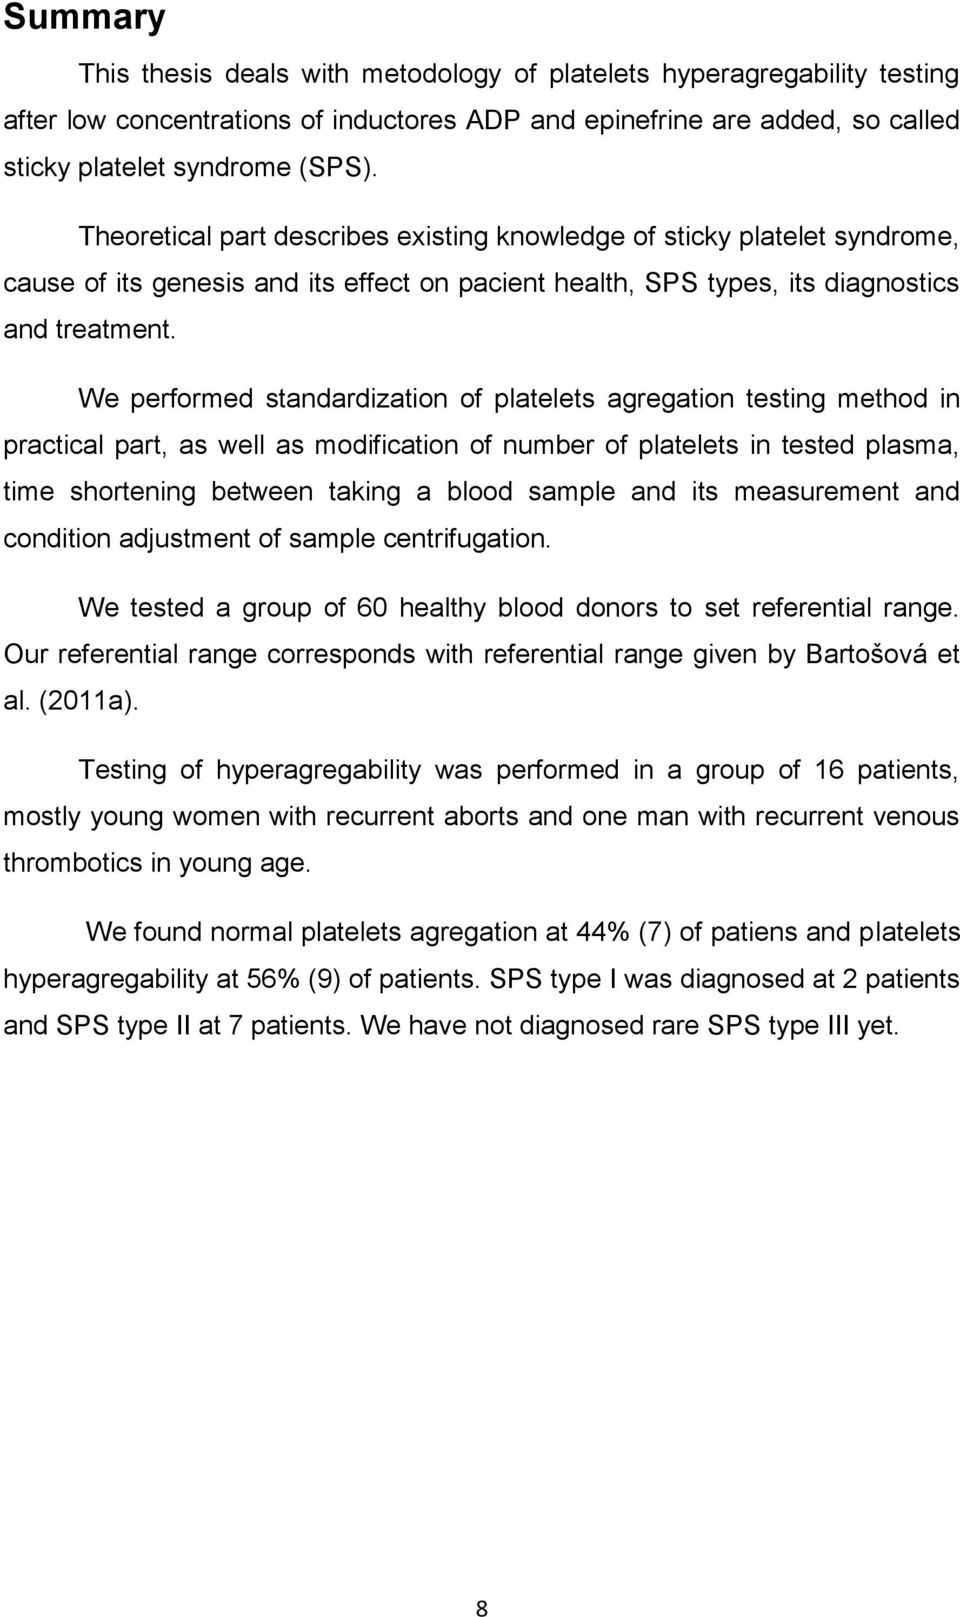 We performed standardization of platelets agregation testing method in practical part, as well as modification of number of platelets in tested plasma, time shortening between taking a blood sample